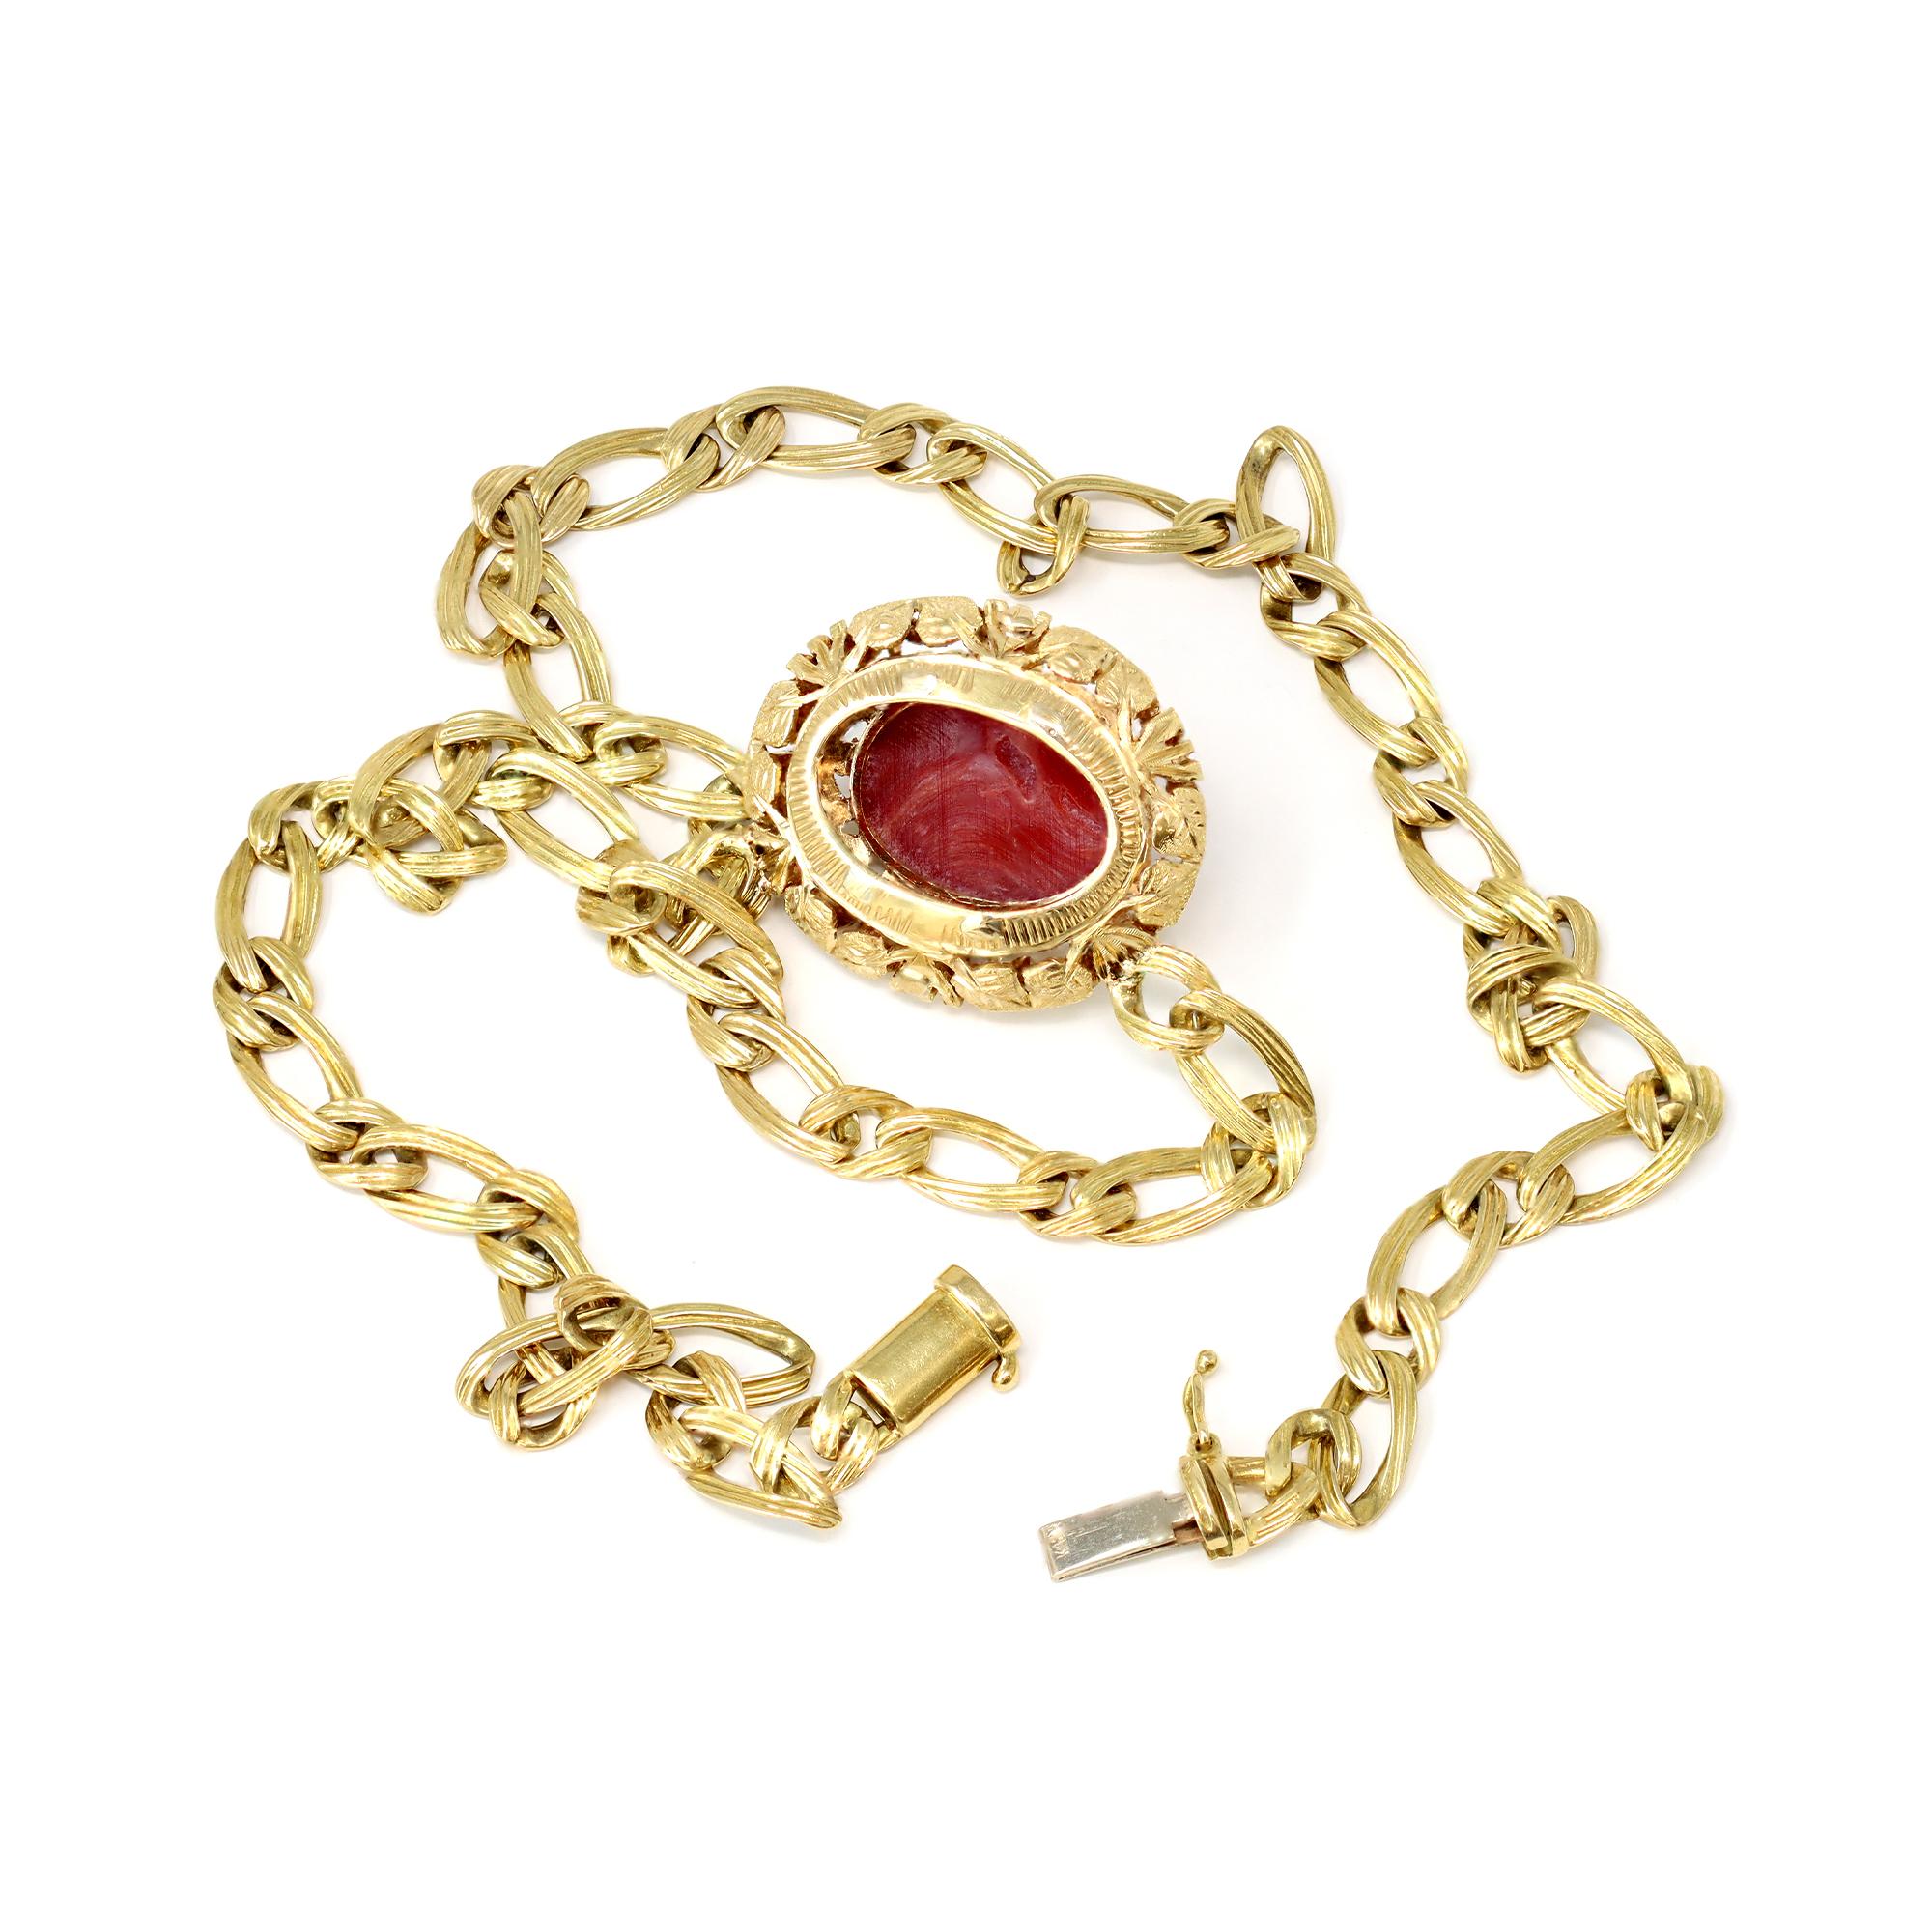 Modern 1960s Gold Necklace with Cabochon Oxblood Coral Center